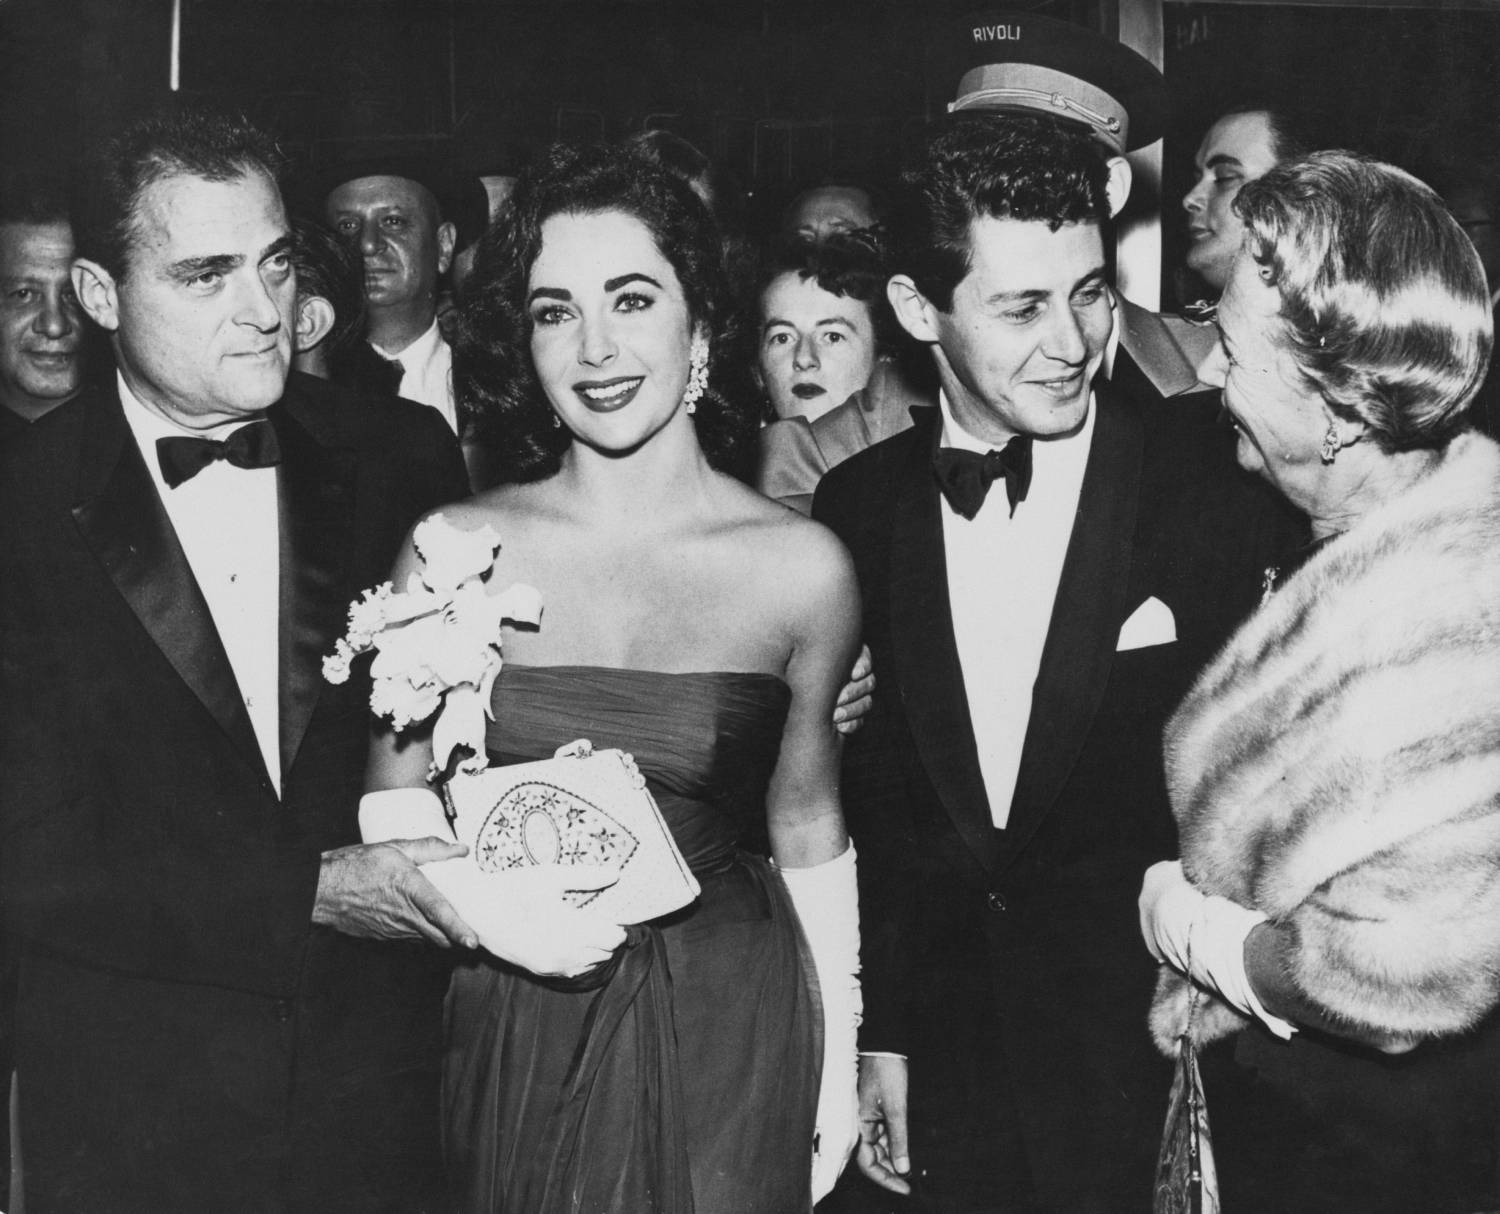 Actress Elizabeth Taylor at an event with her husband film producer Mike Todd (left), and singer Eddie Fisher, circa 1957.